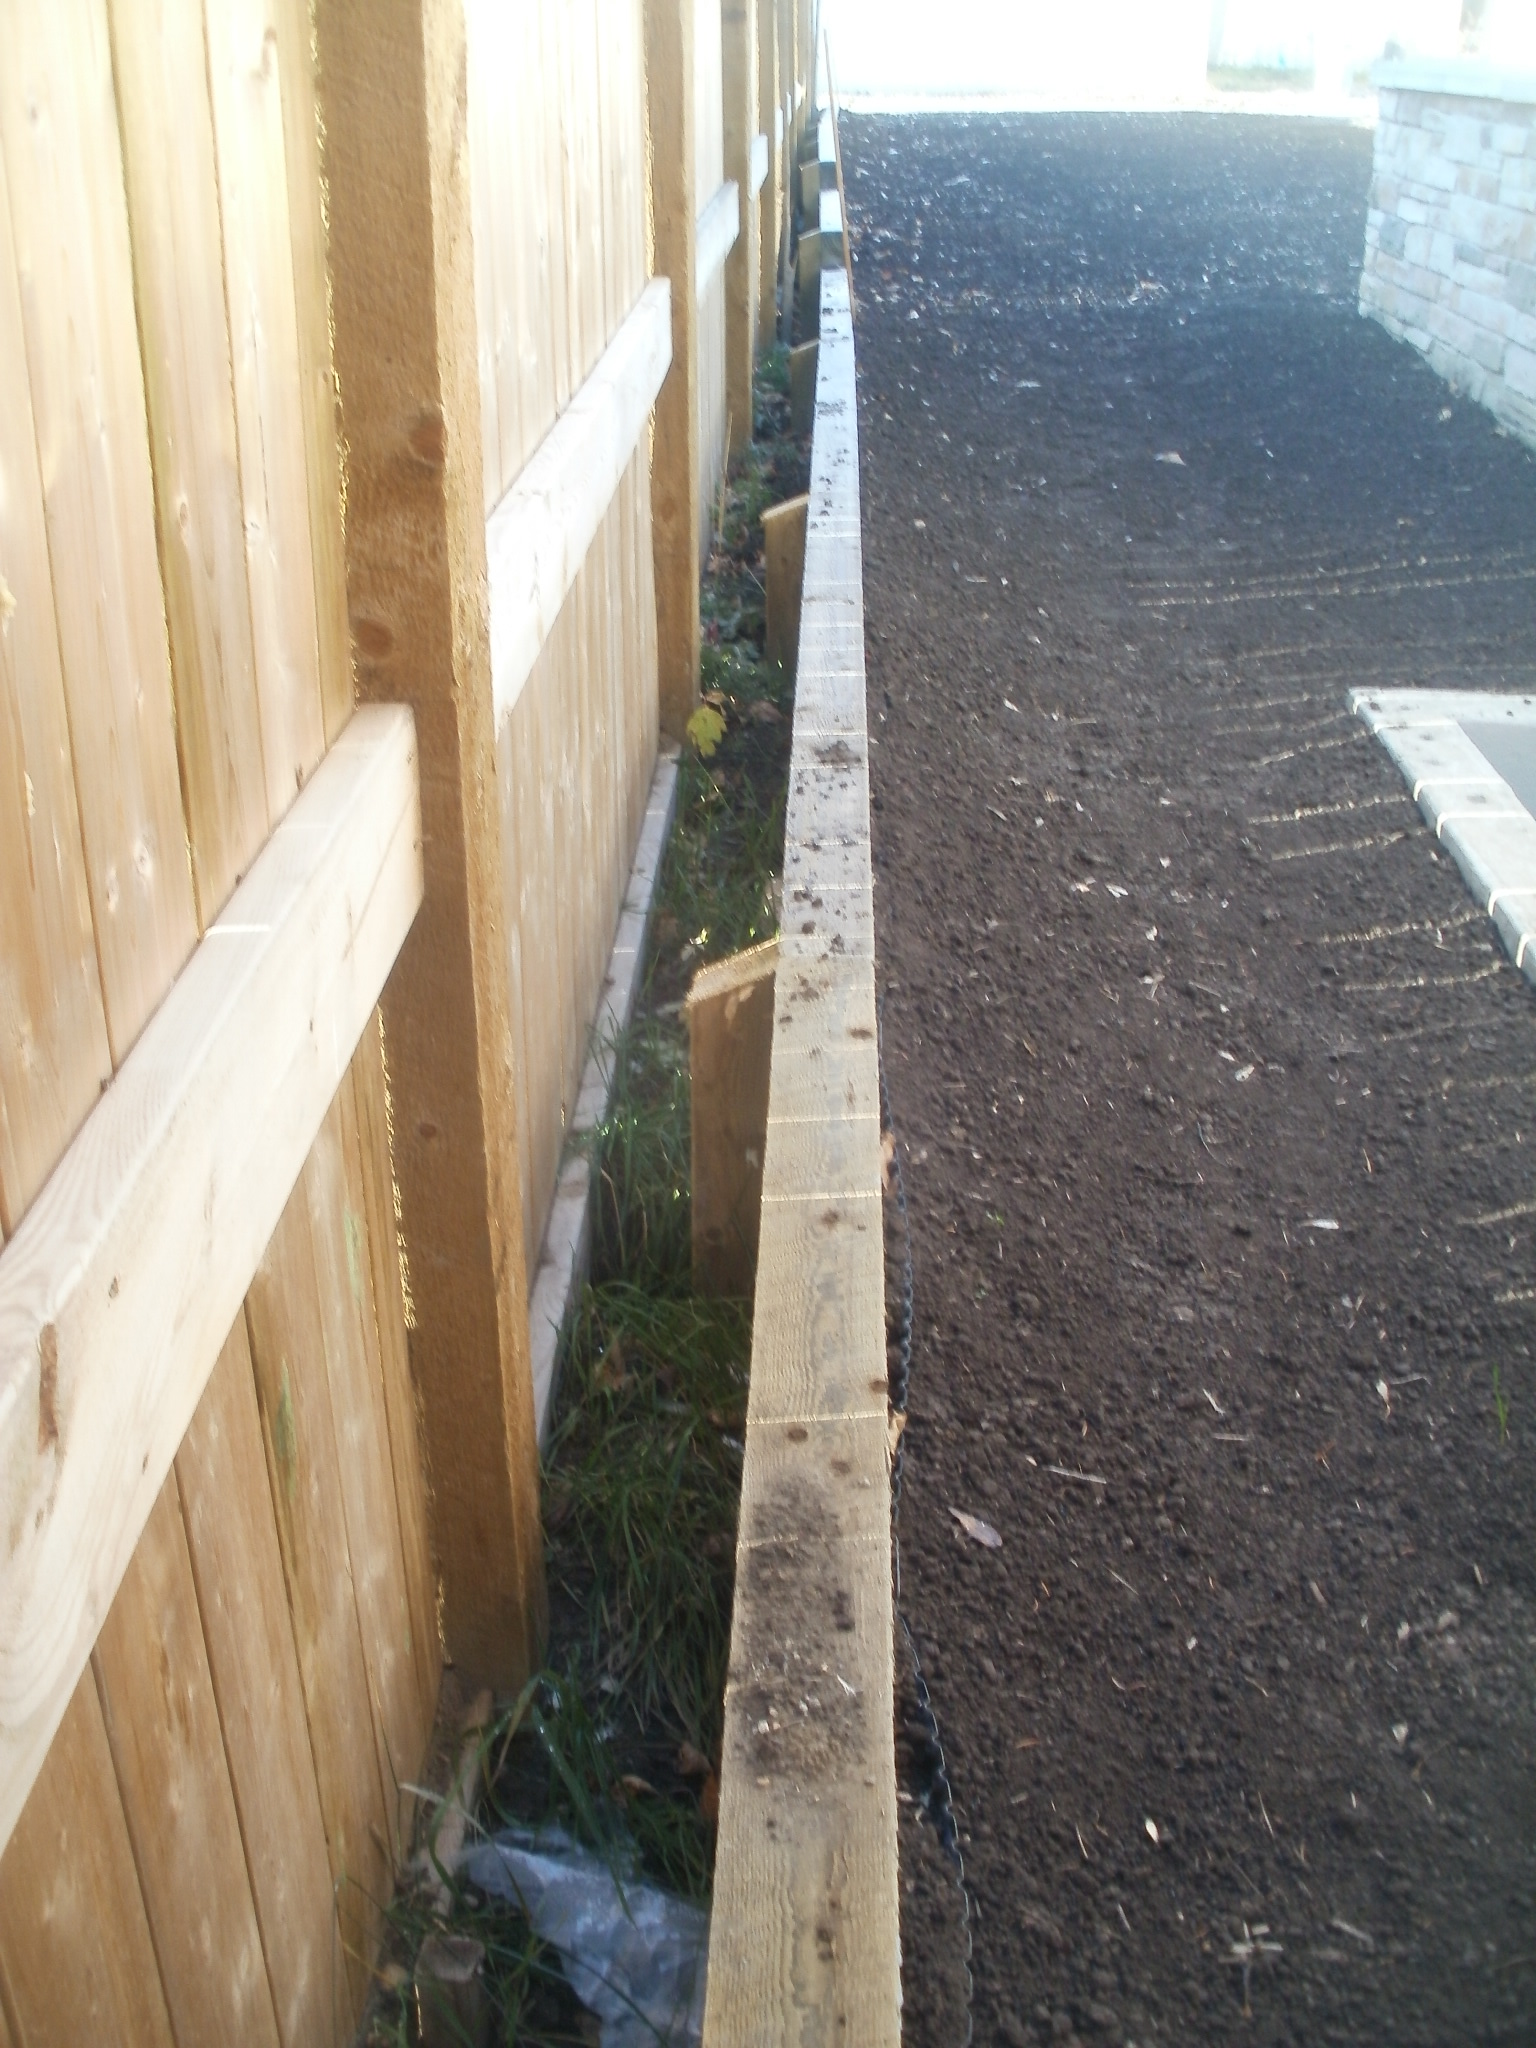 Retaining wall within private property